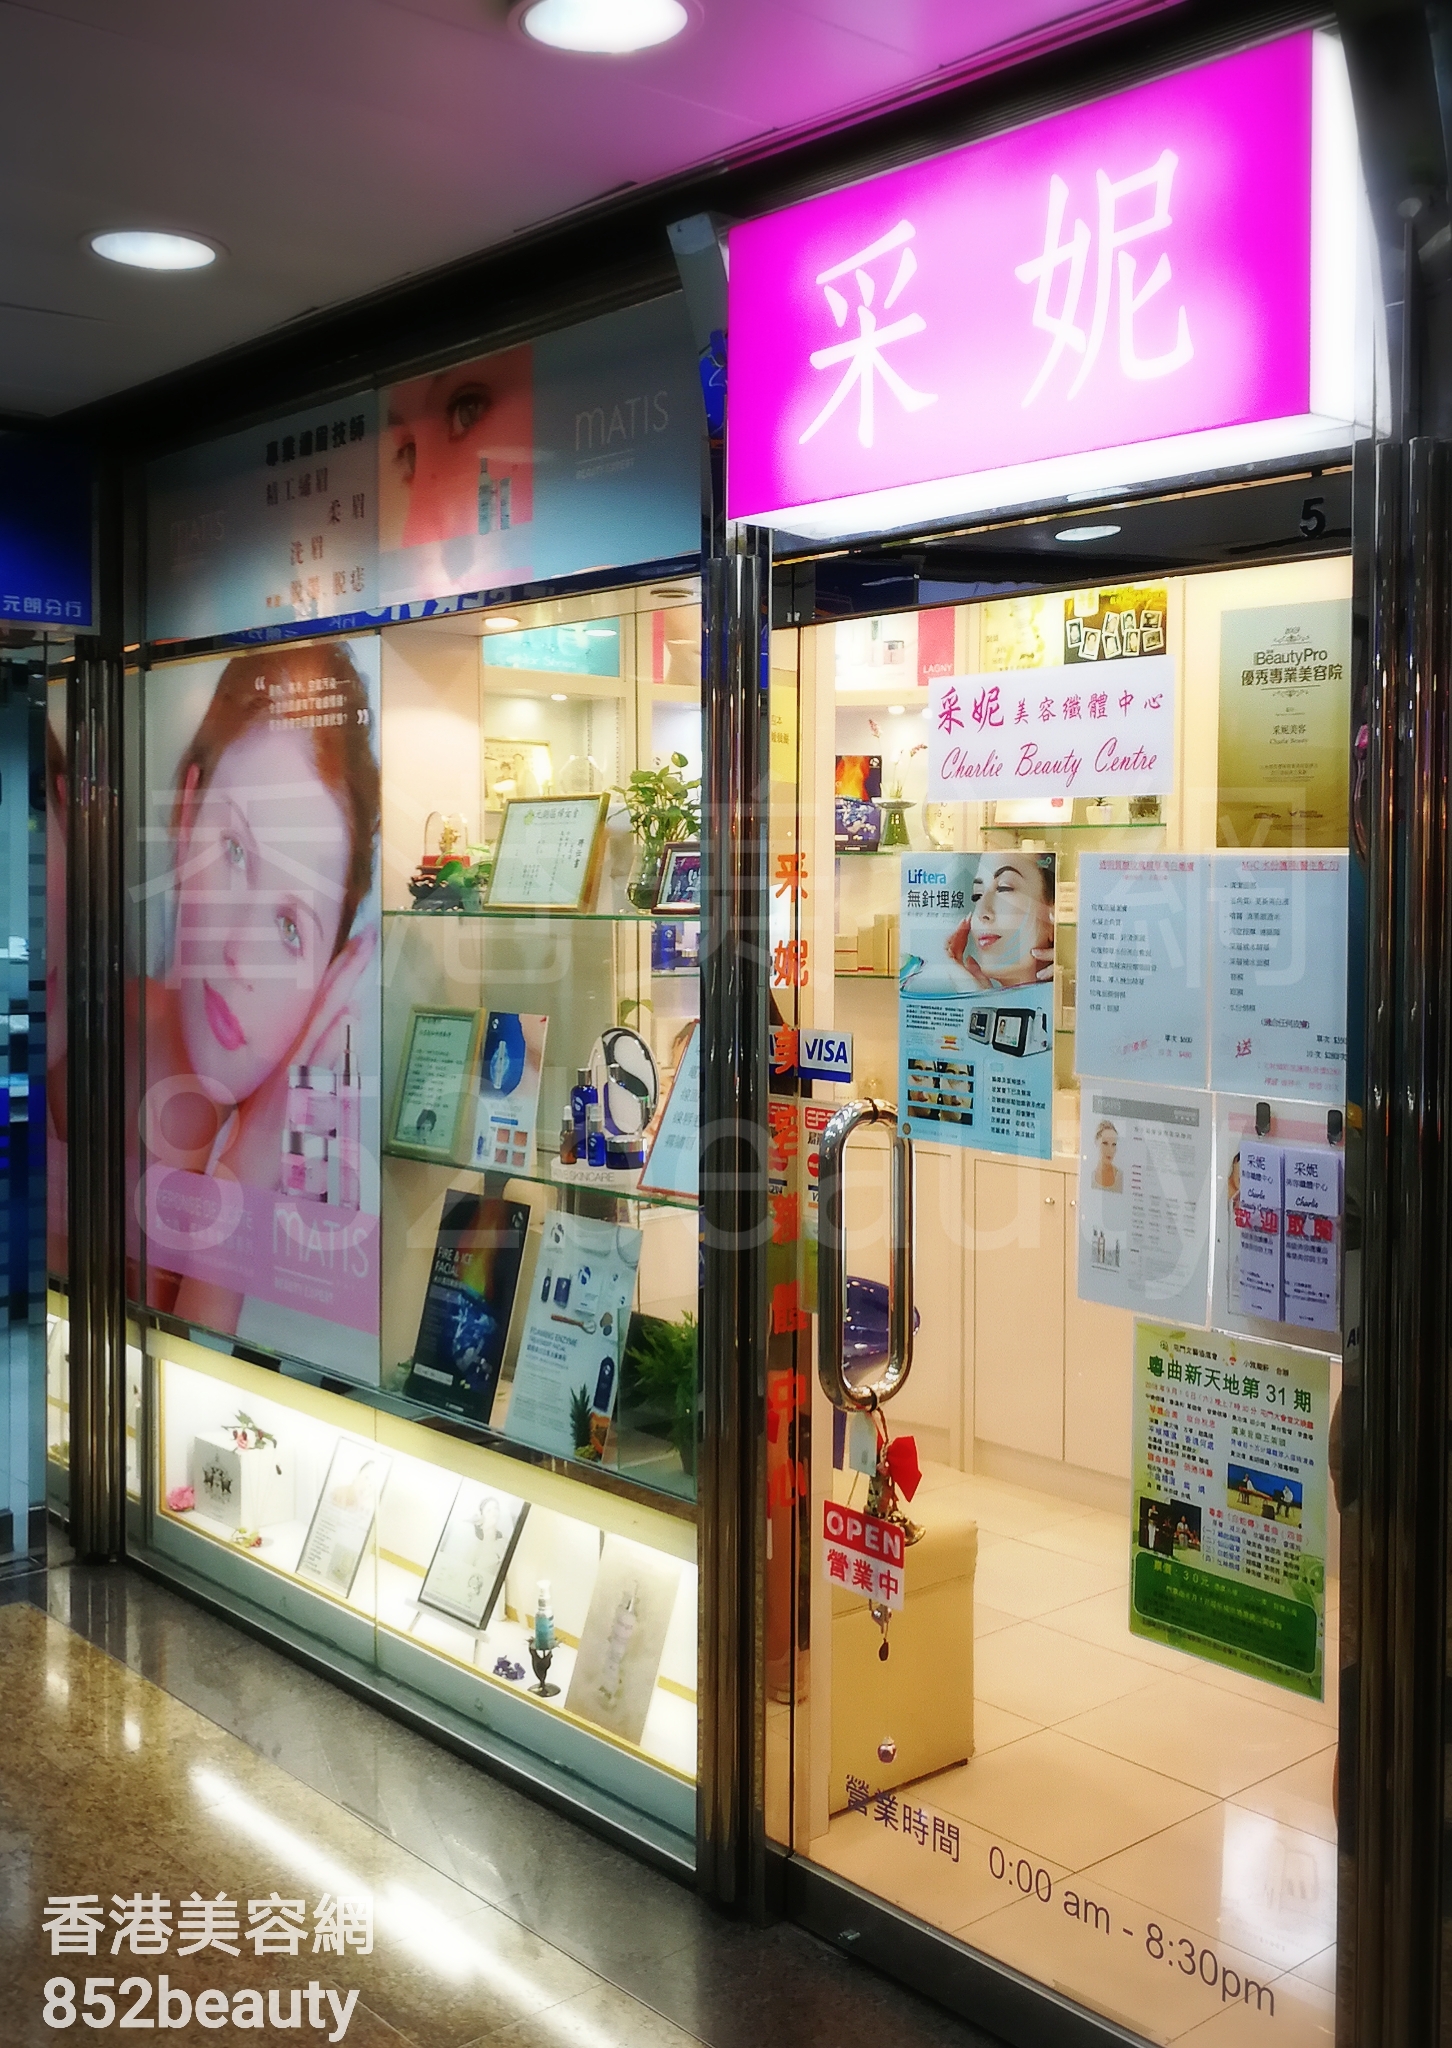 Hand and foot care: 采妮美容中心 Charlie Beauty Centre